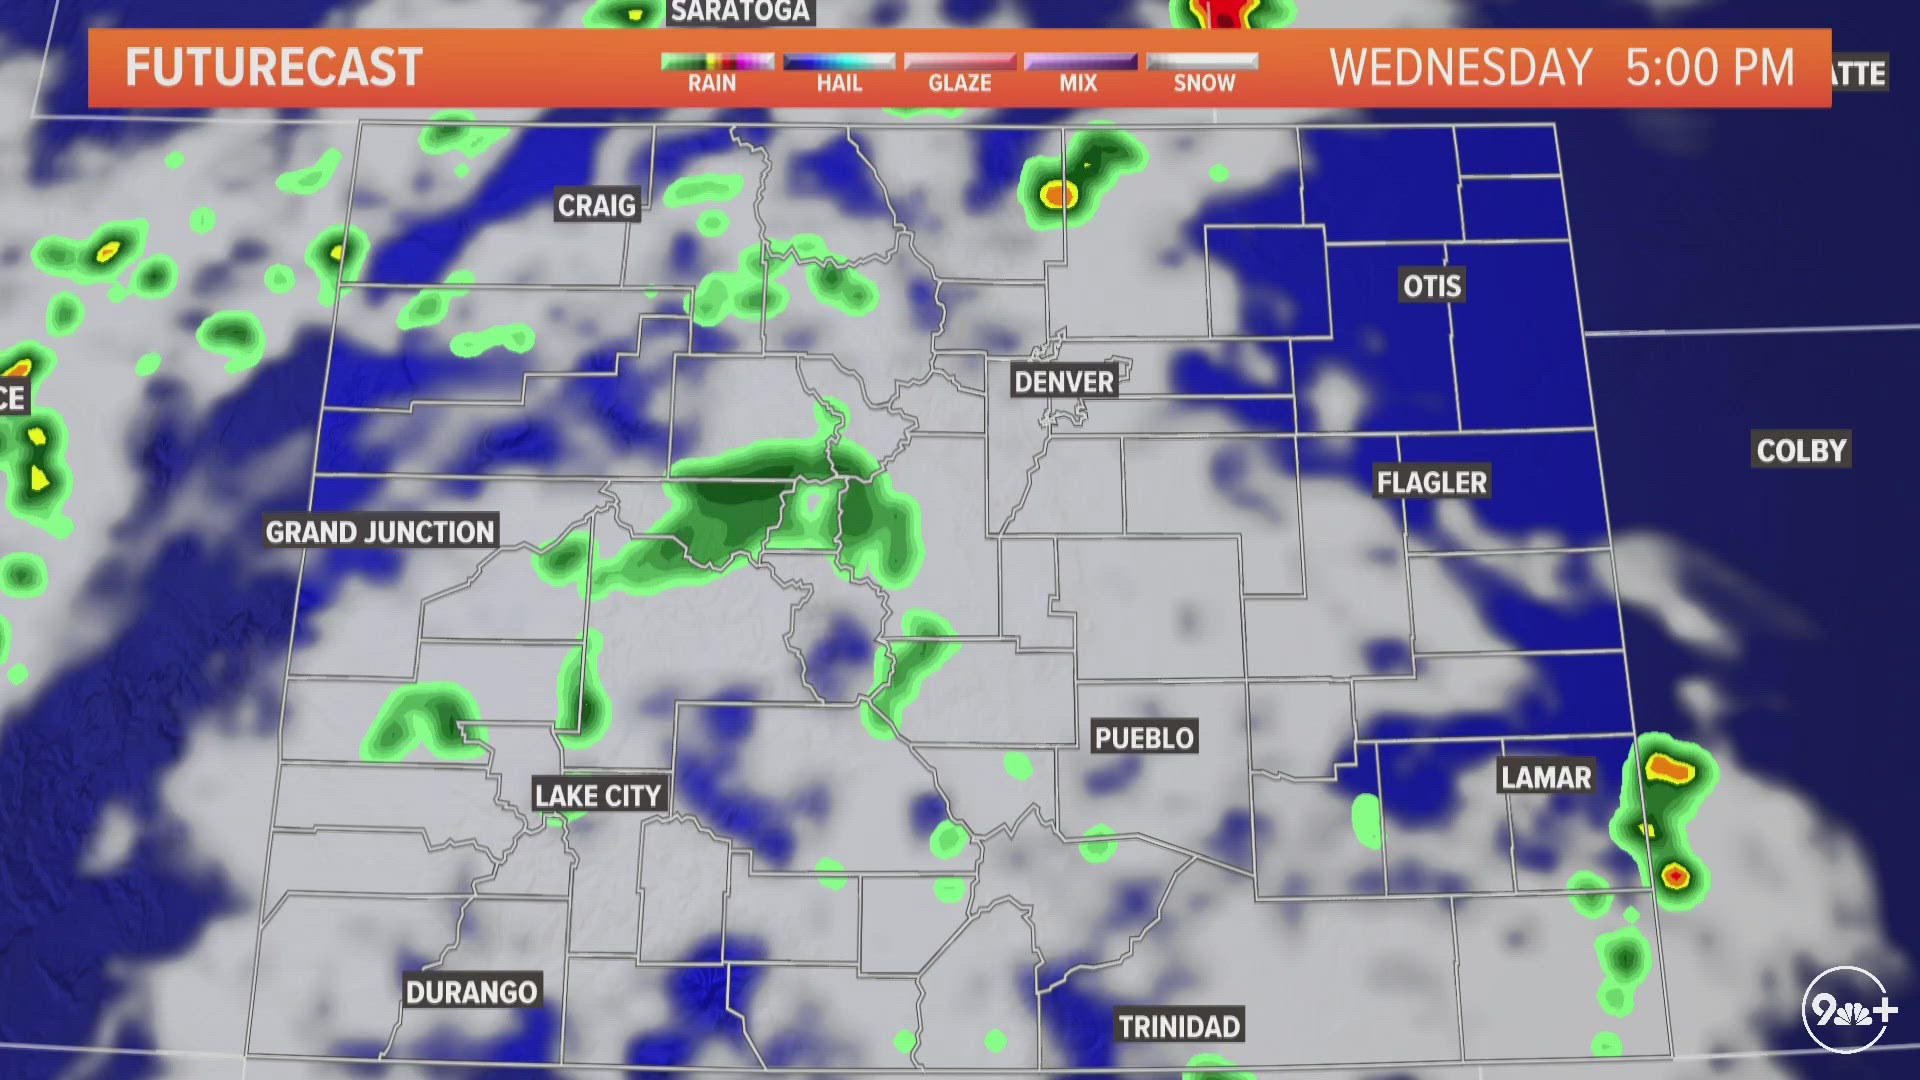 Watch for scattered showers to push into the high country during the early afternoon hours, before becoming isolated thundershowers across the Front Range.